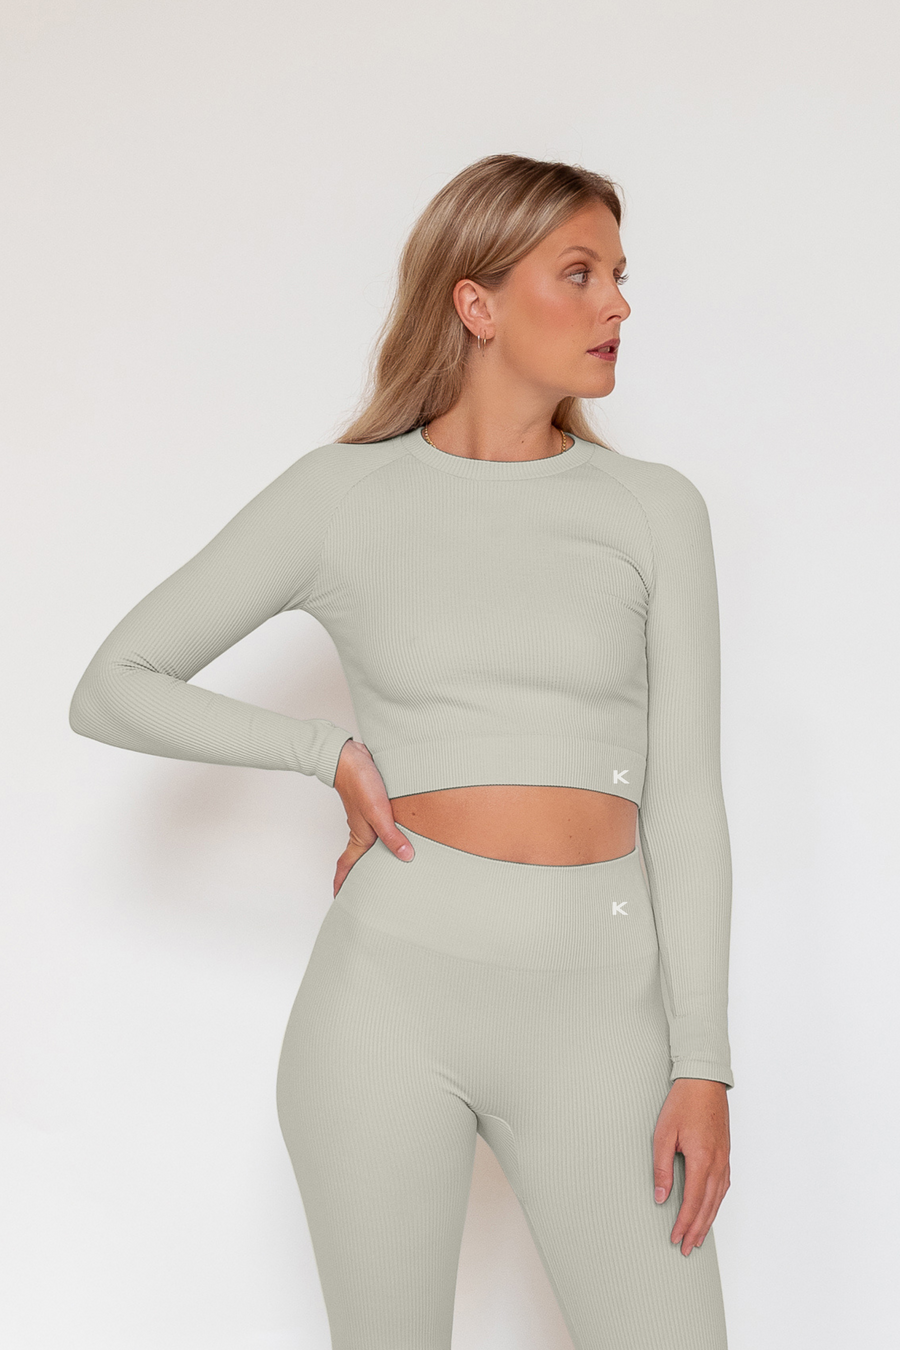 The seamless anf ribbed long sleeve crop top in sage yoou need in your closet.